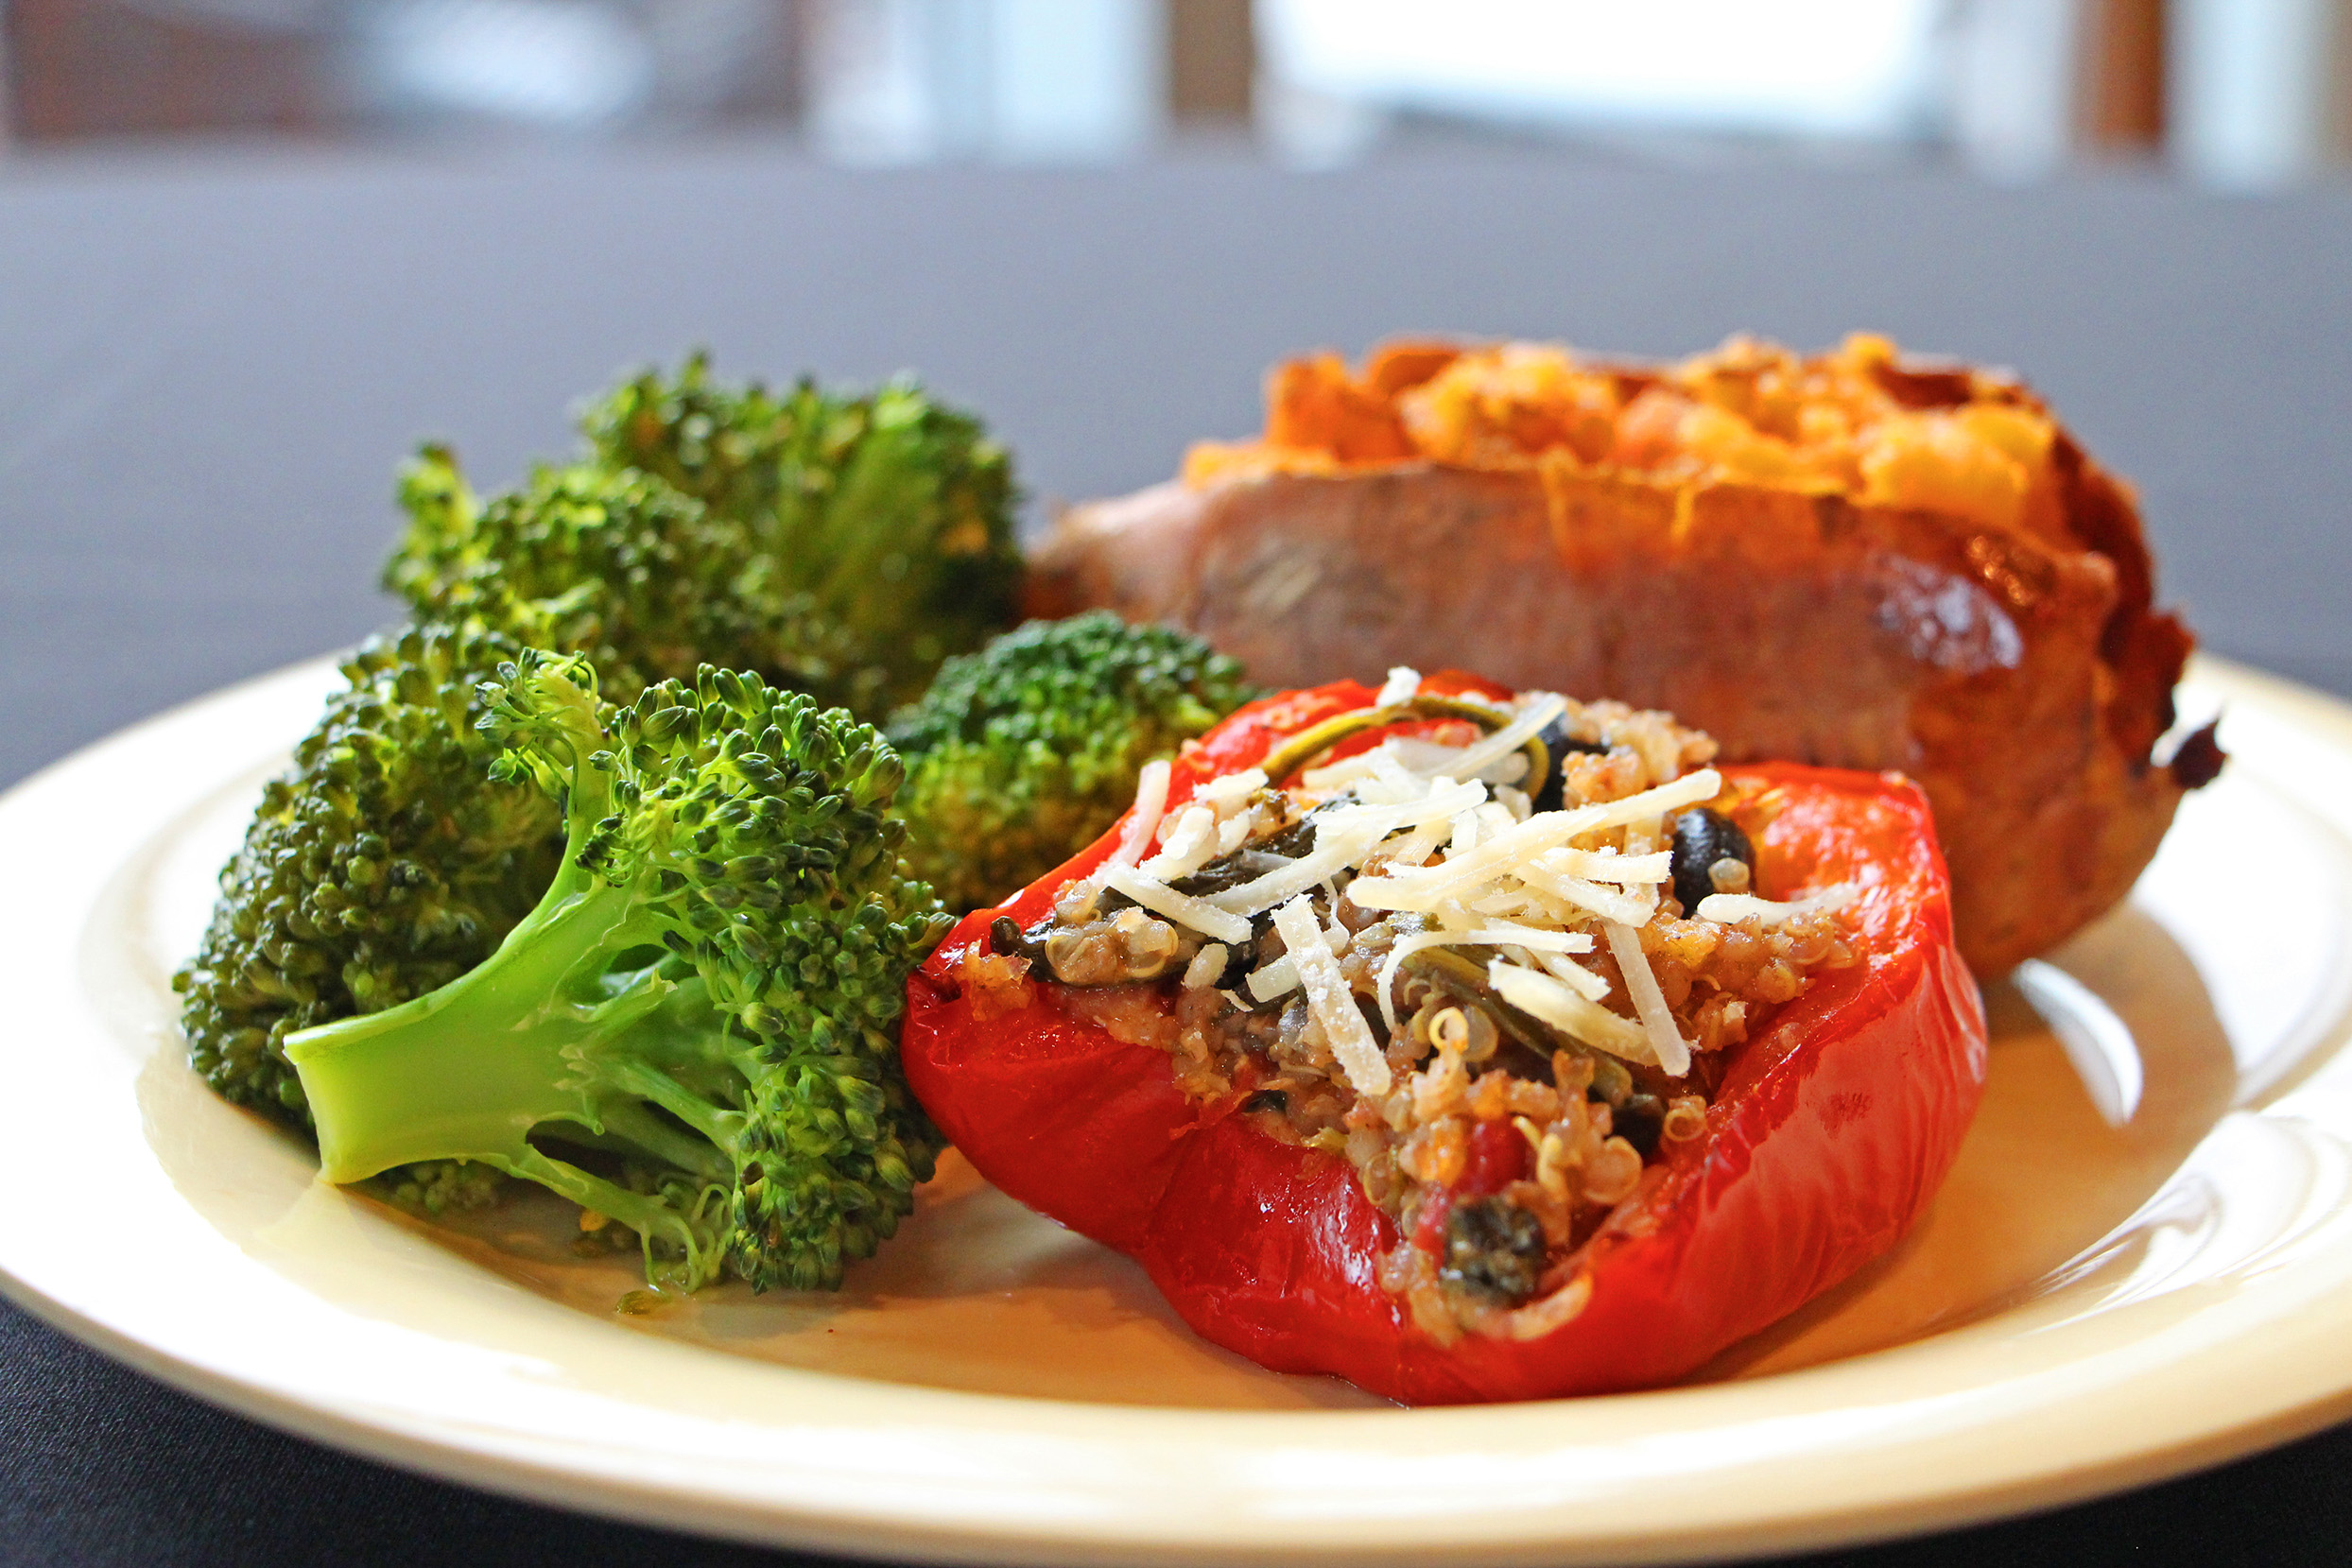 A white plate with steamed broccoli, a sweet potato, and a red bell pepper stuffed with quinoa and cheese.